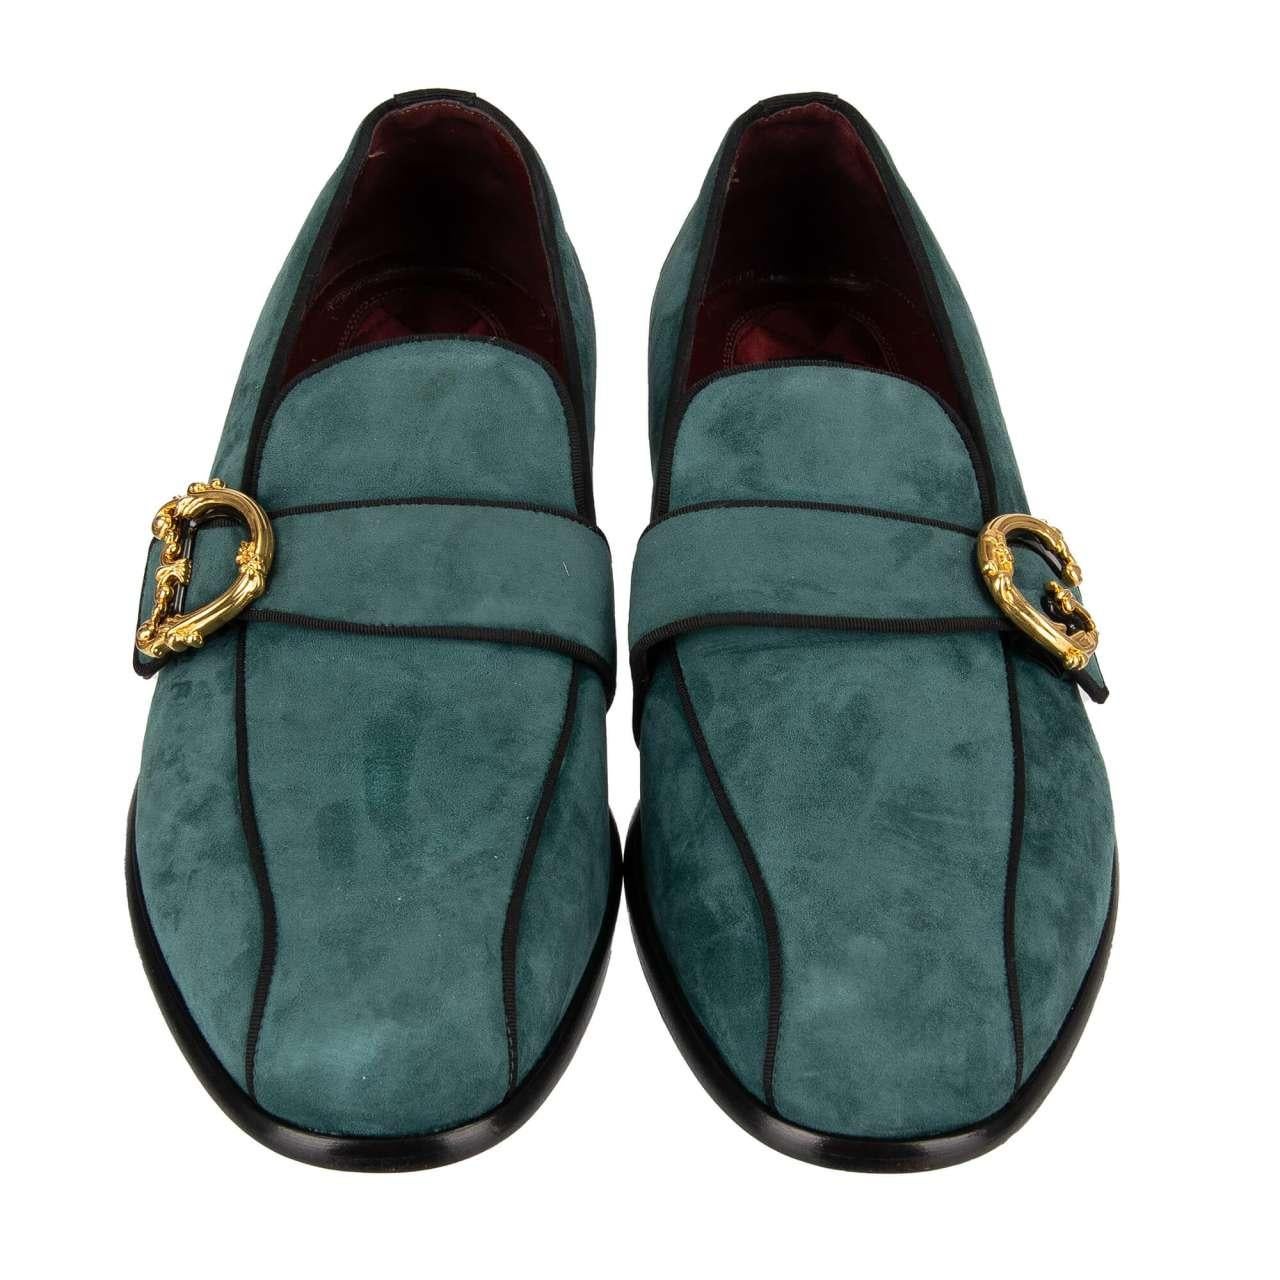 - DG Baroque logo buckle embellished loafer shoes MILANO made of suede in blue by DOLCE & GABBANA - MADE IN ITALY - Former RRP: EUR 750 - New with Box - Model: A50411-A1275-86096 - Material: 100% Goatskin - Sole: Leather - Color: Blue - Satin and